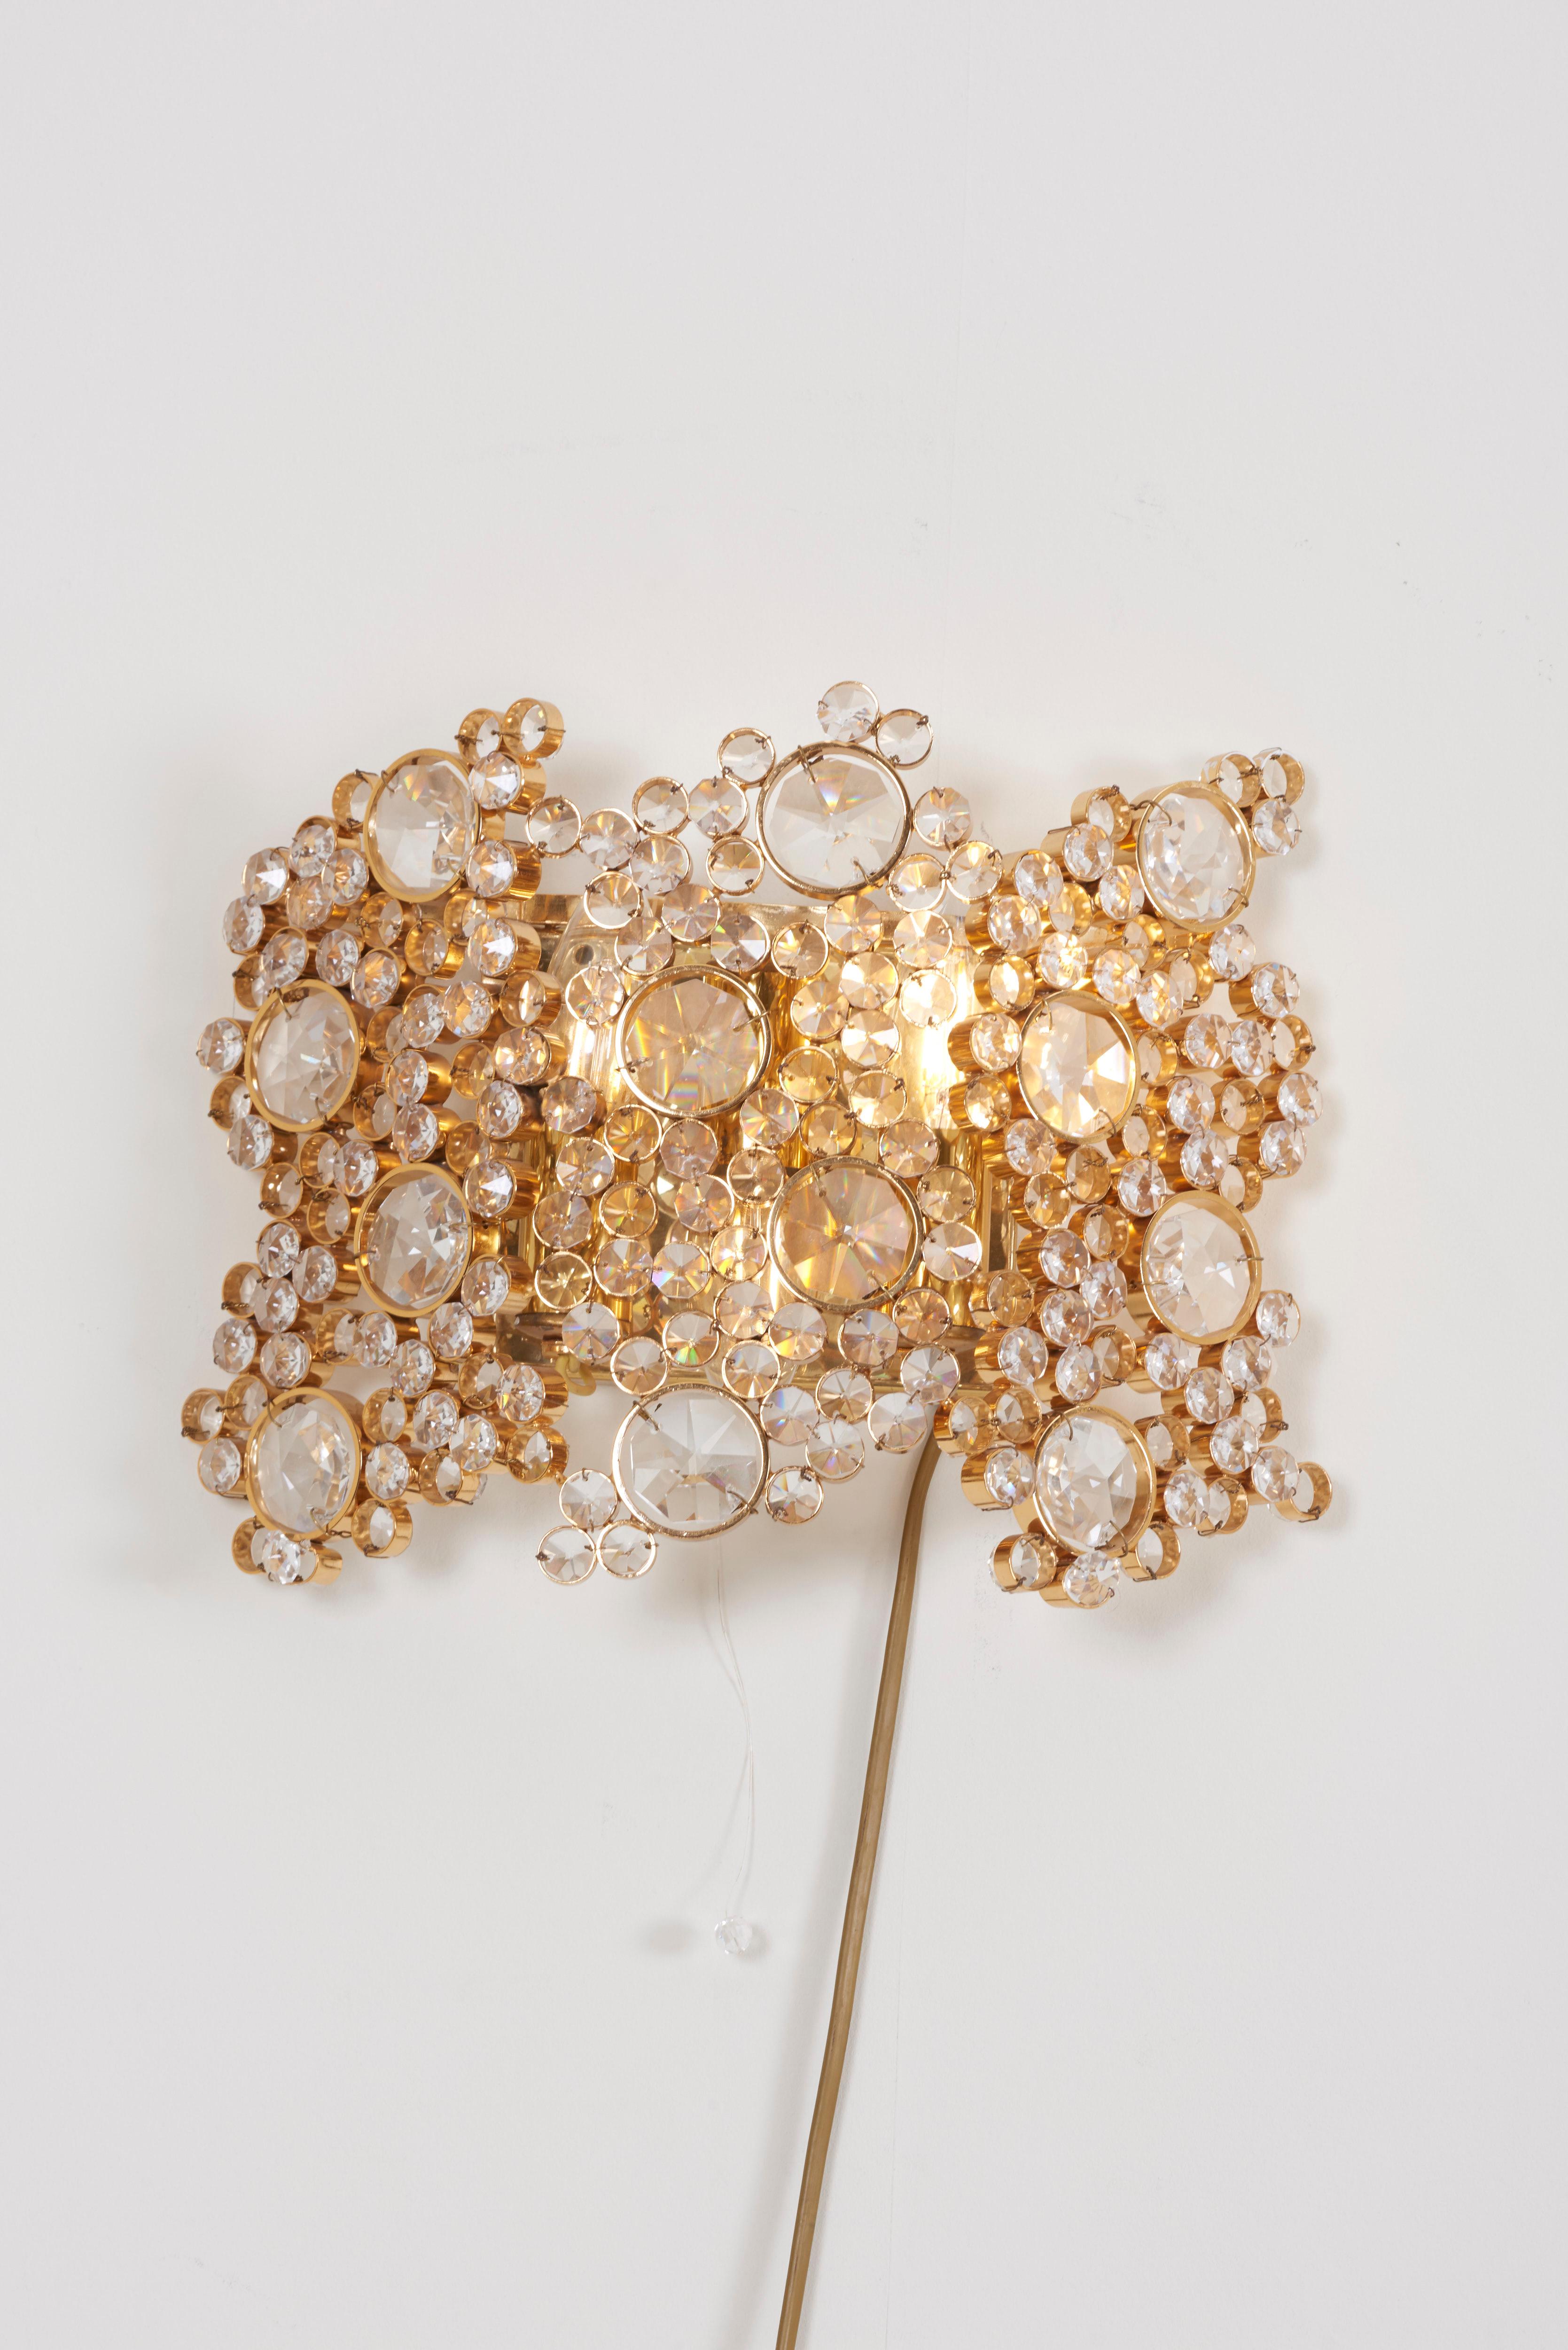 One of four outstanding Palwa wall lamps from the 1970s. The gold-plated brass frames are encrusted with high quality diamonds like crystals. The chandeliers are handmade and in excellent condition and float every room in a beautiful warm light. It